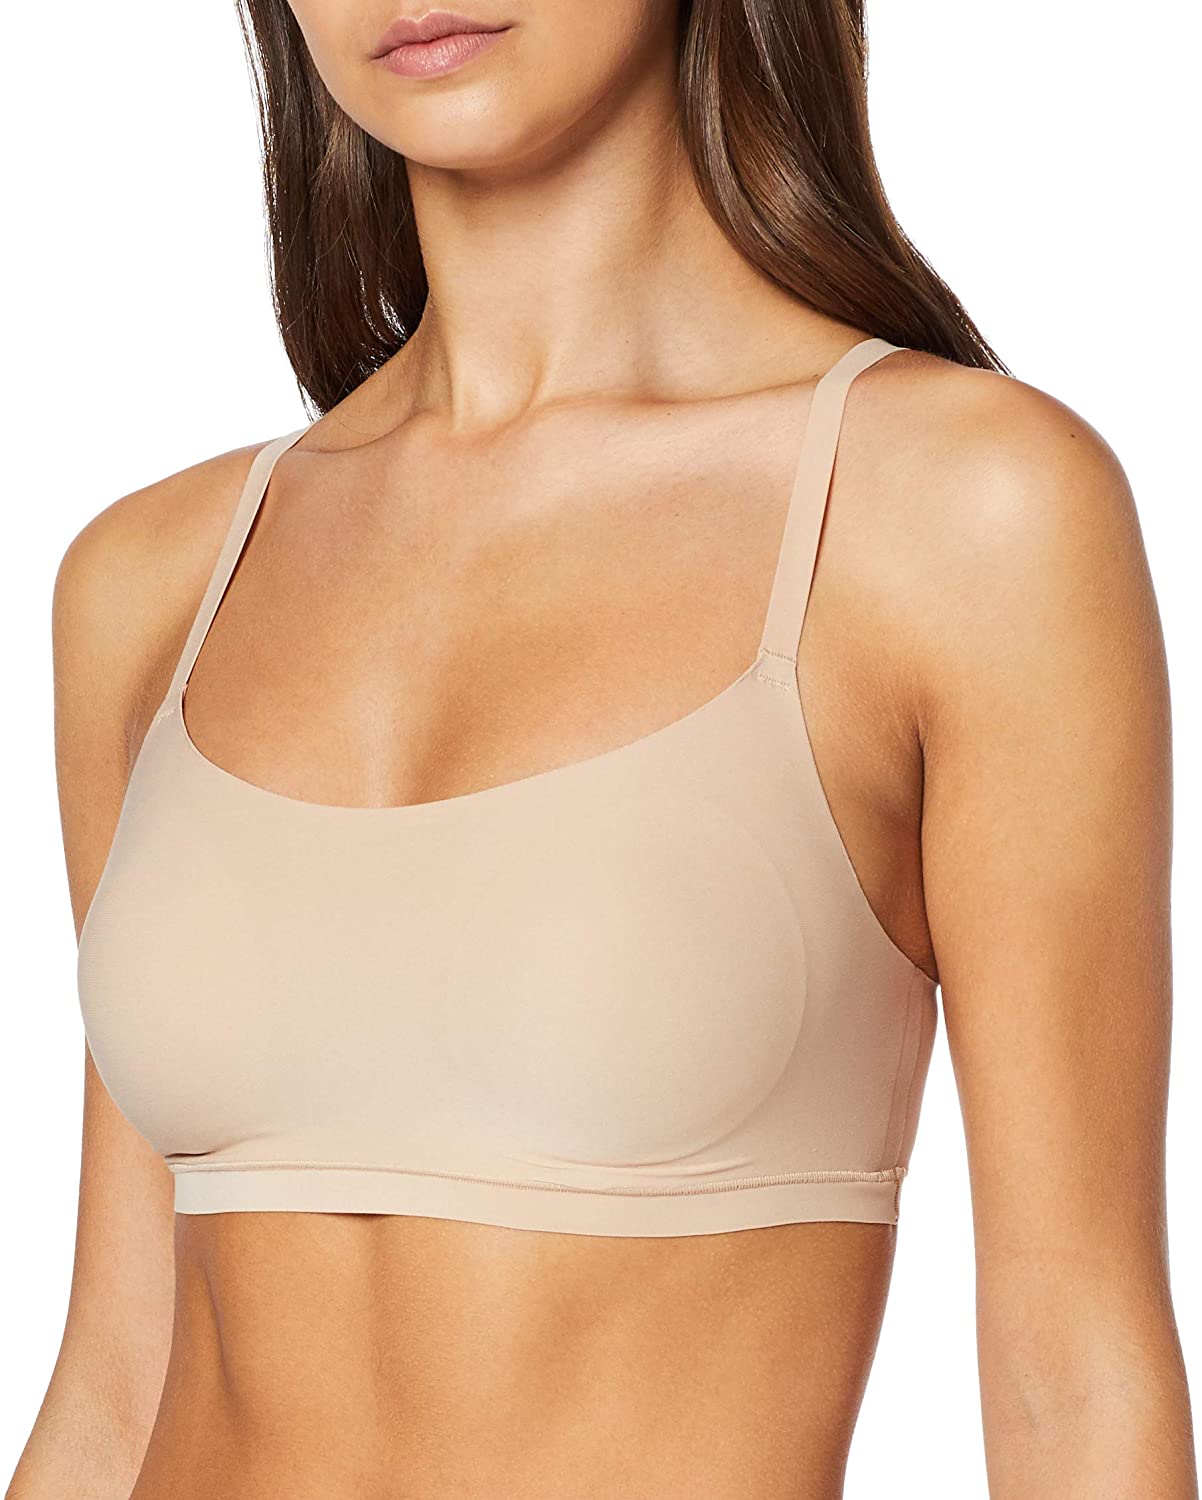 Chantelle Soft Stretch Scoop Padded Wire-Free Bralette 16A2 - Chantelle 